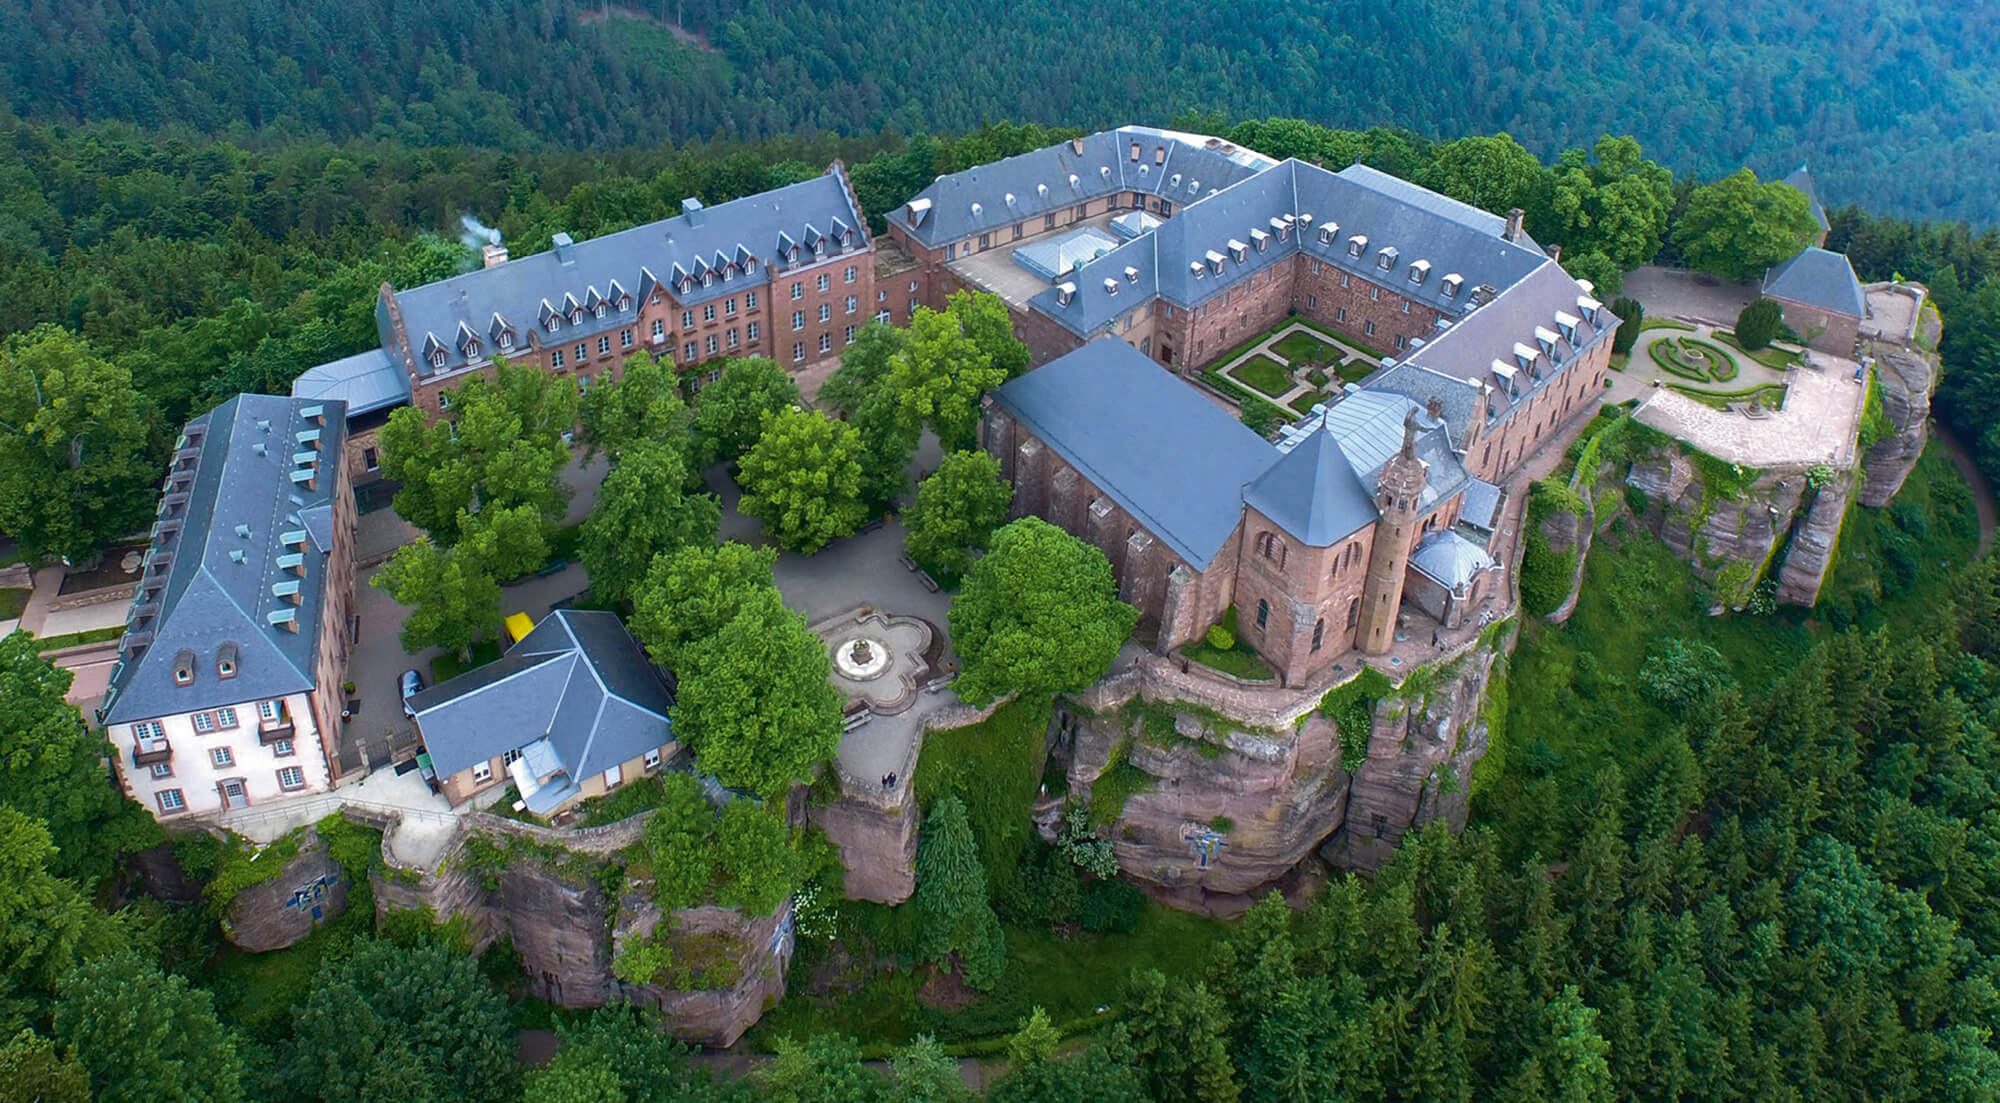 An aerial photograph of the monastery Mont Sainte-Odile, perched high in the mountains of France.